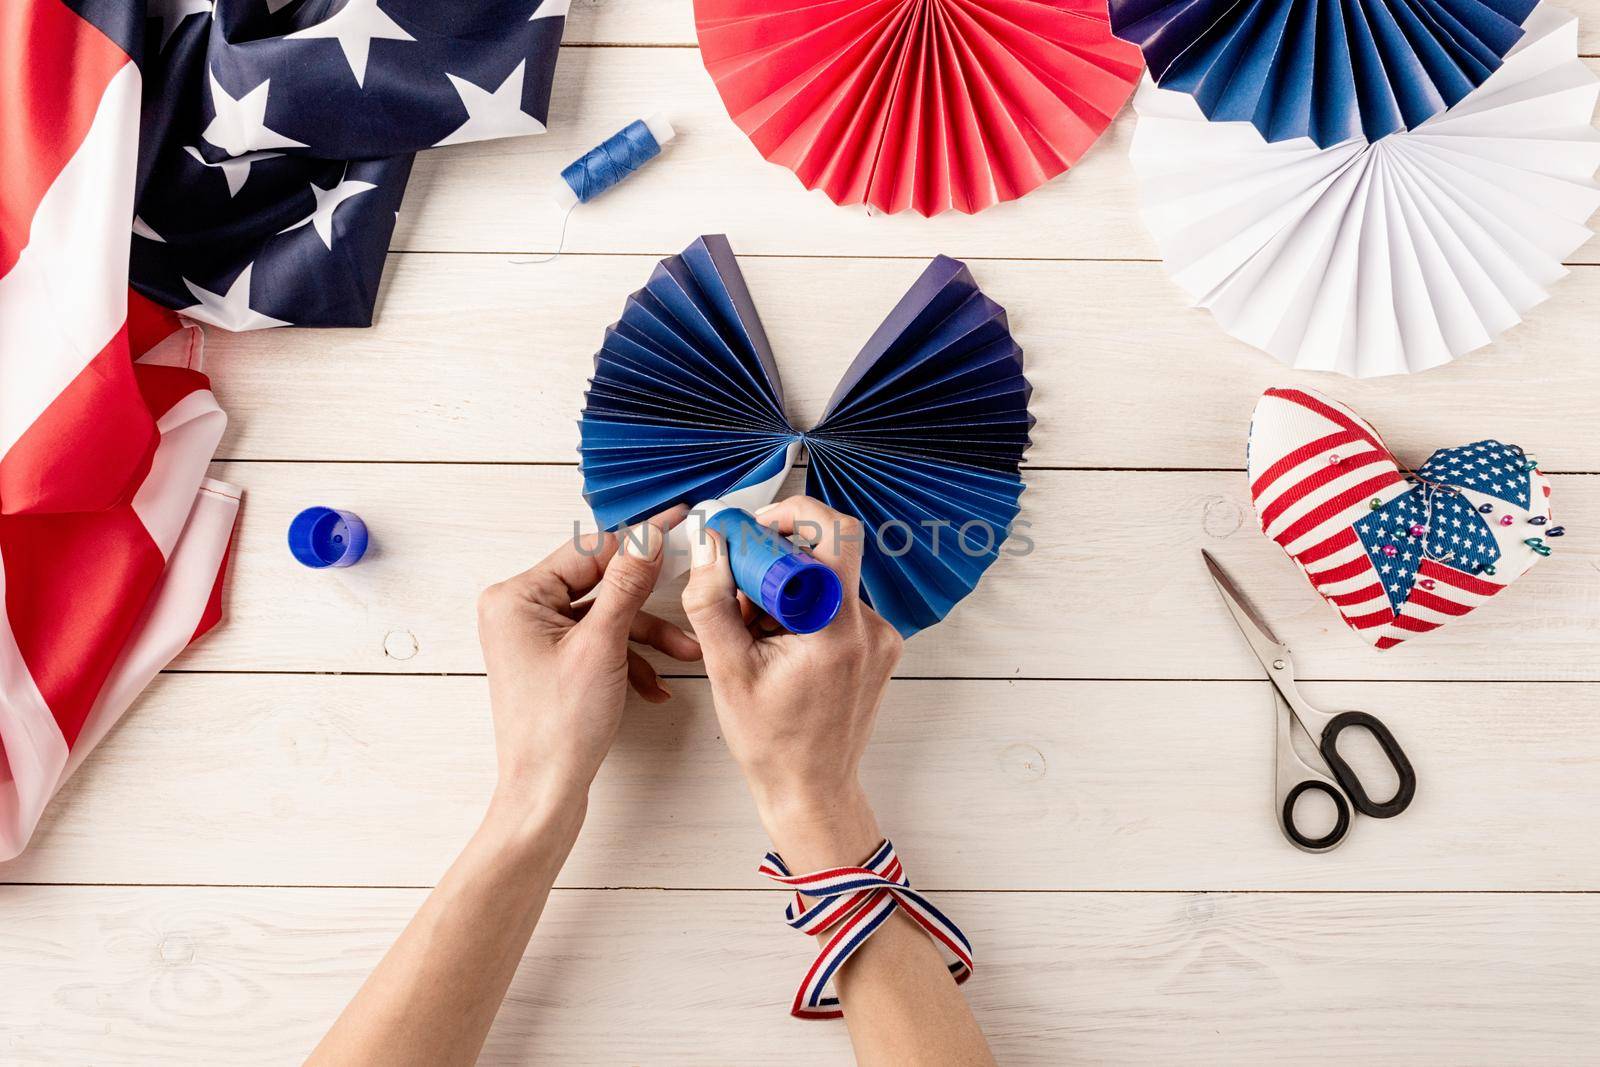 Gift idea, decor July 4, USA Independence Day. Step by step tutorial DIY craft. Making colorful paper fans, step 6 - fold and glue the sides. Flat lay top view